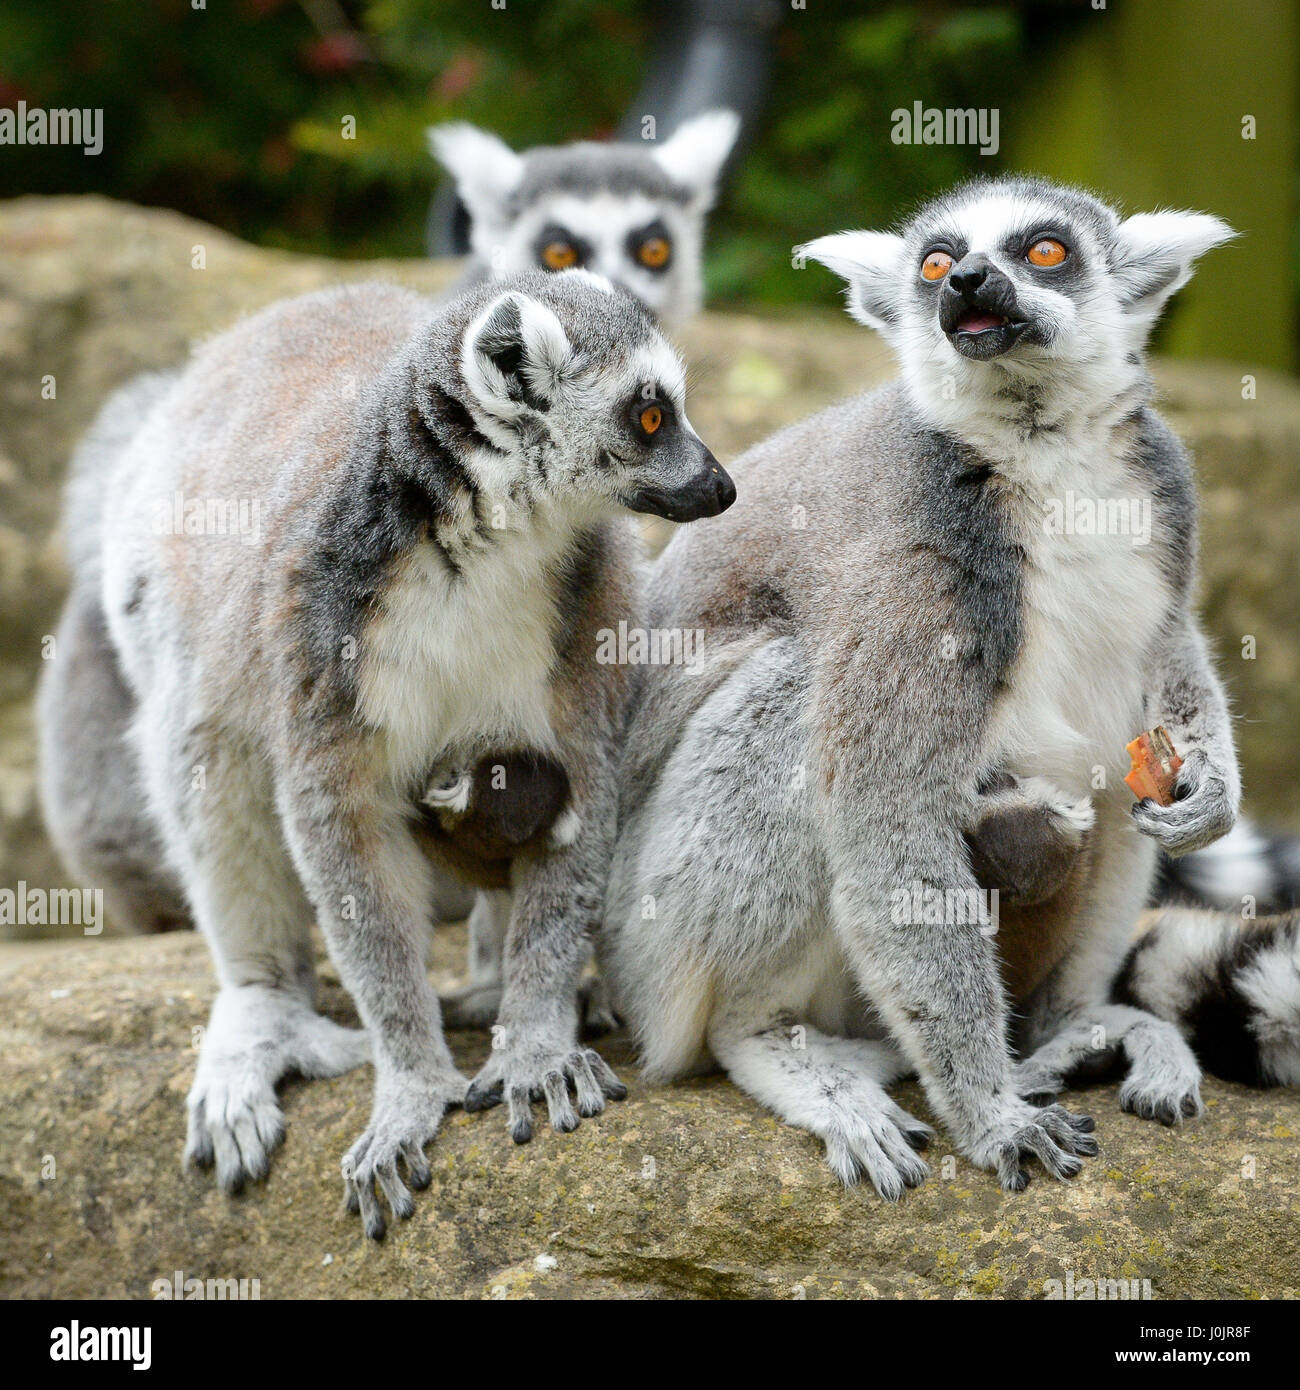 Ring-tailed lemurs Mavis and Ethel, who are twin sisters, with their 10-day-old babies after they both gave birth hours apart at Bristol Zoo Gardens. Stock Photo